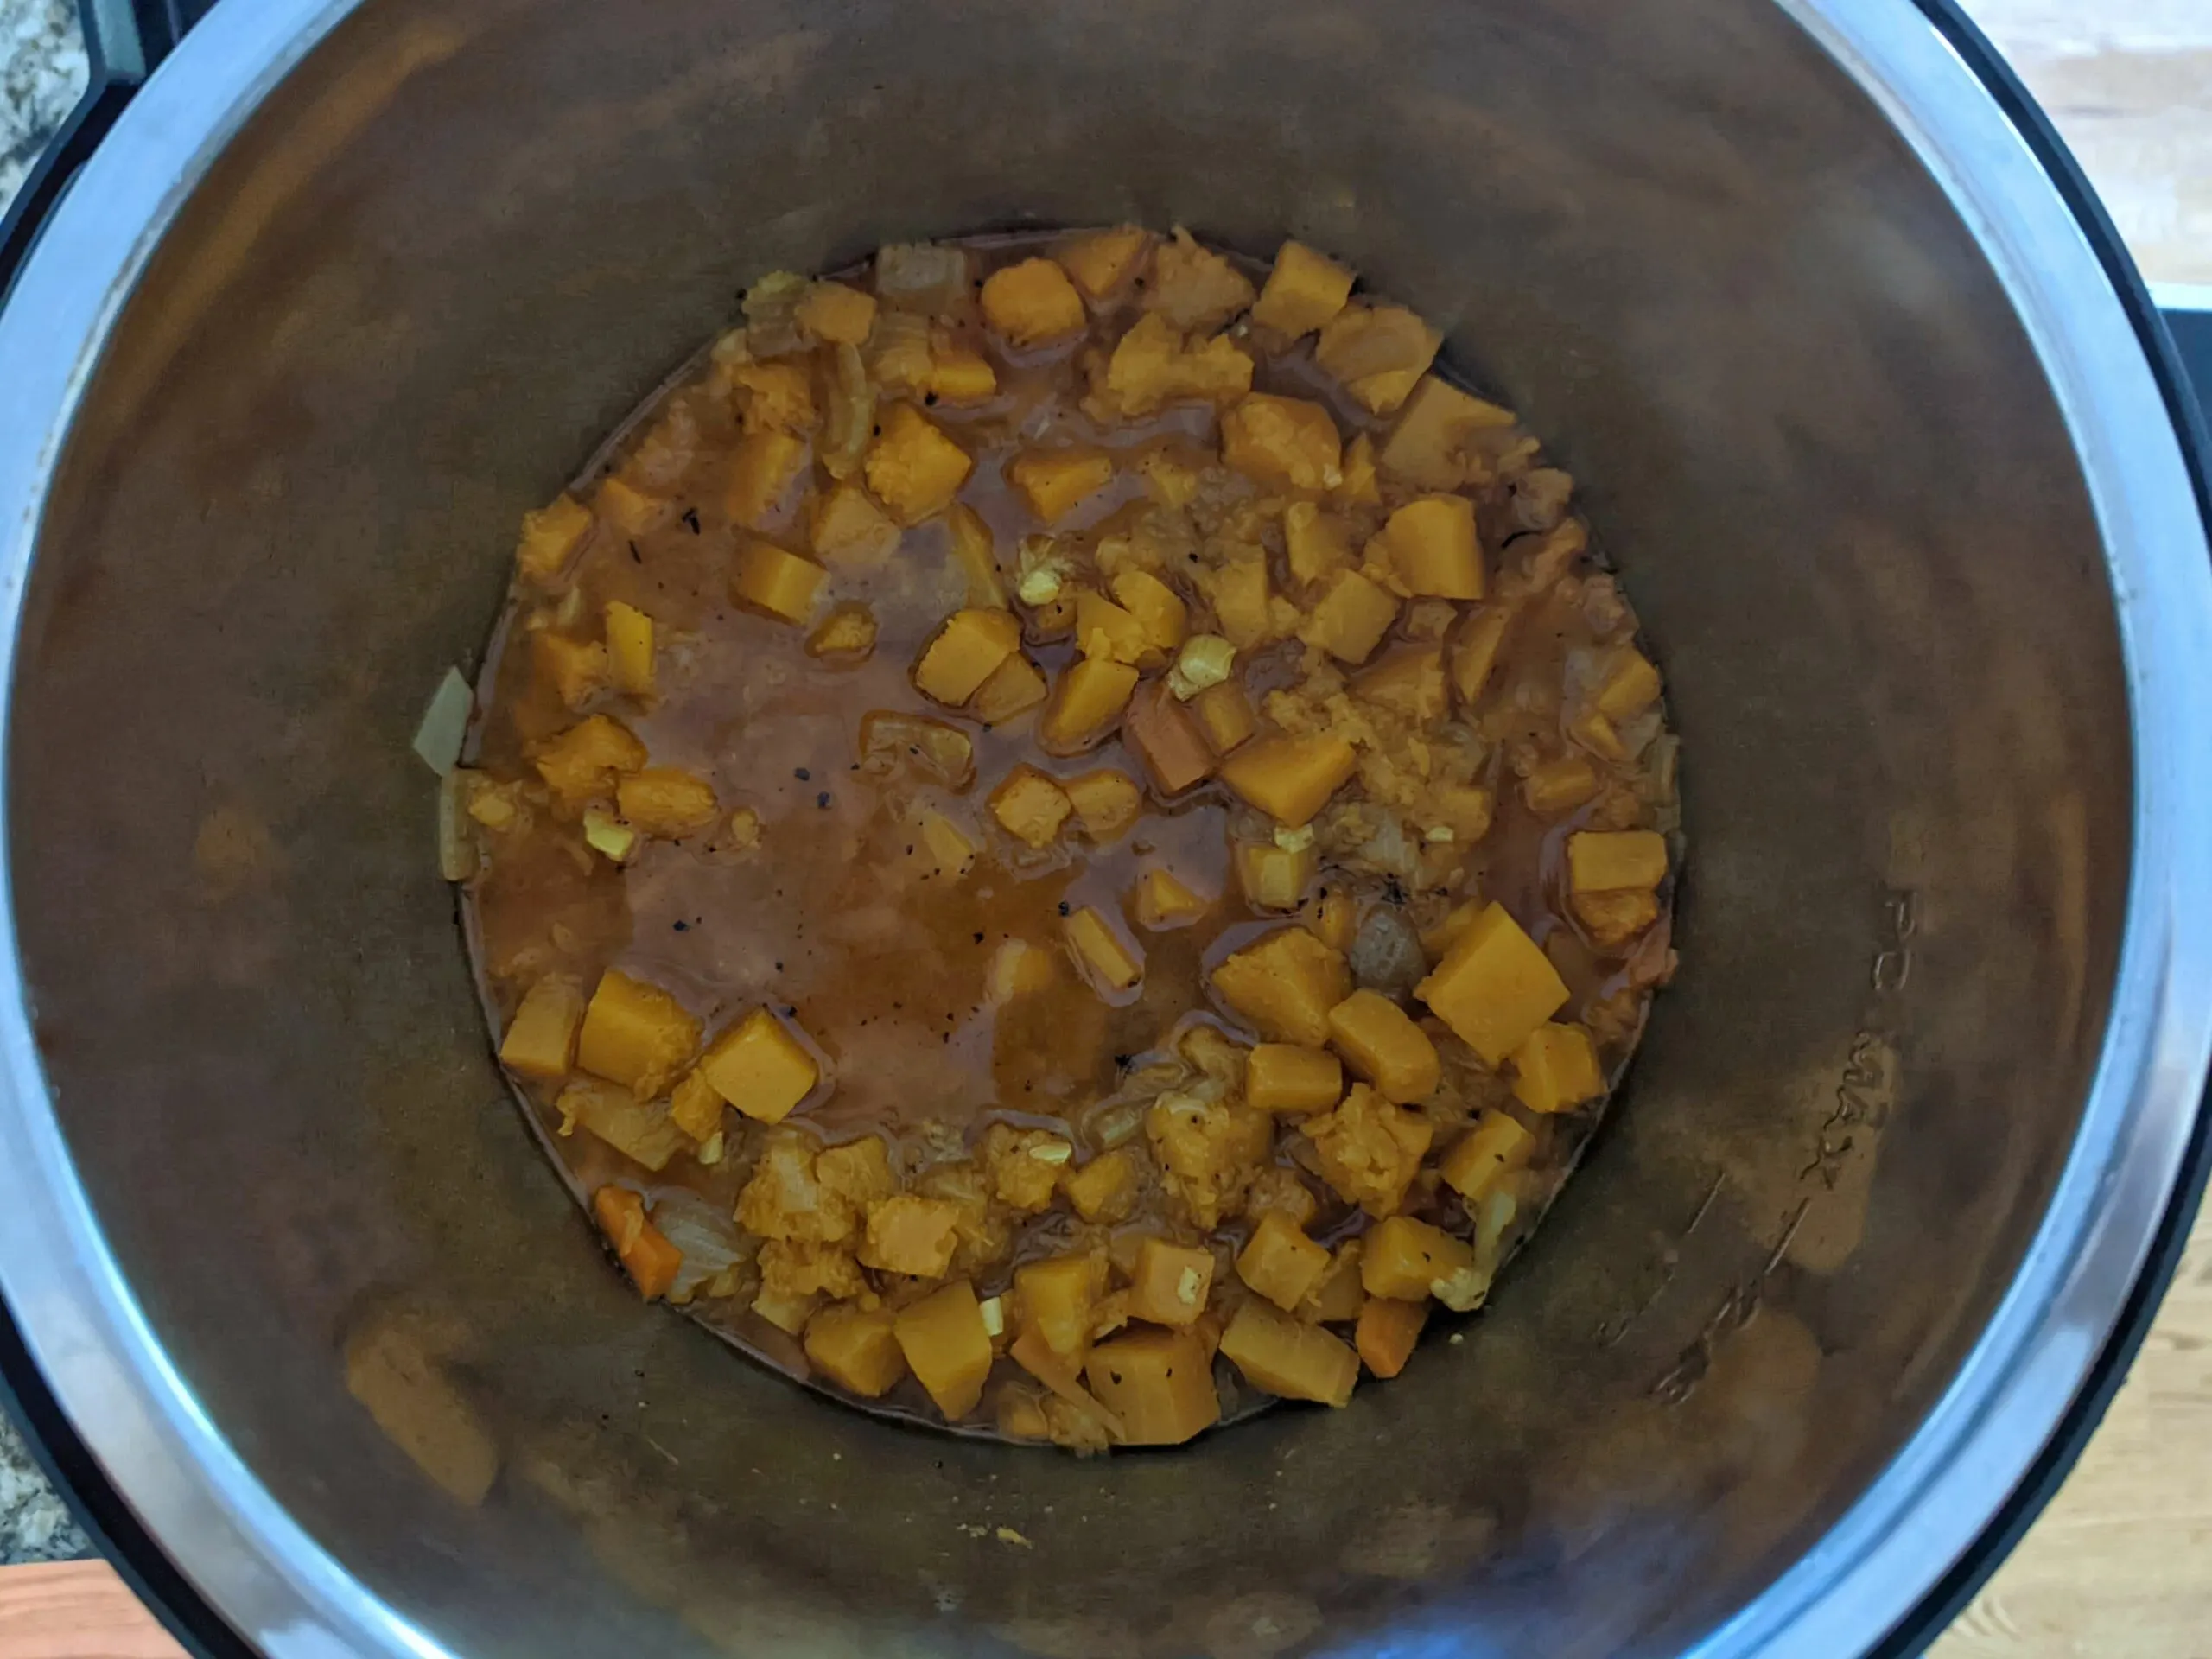 Vegetable stock poured over the vegetables cooking in the Instant Pot.